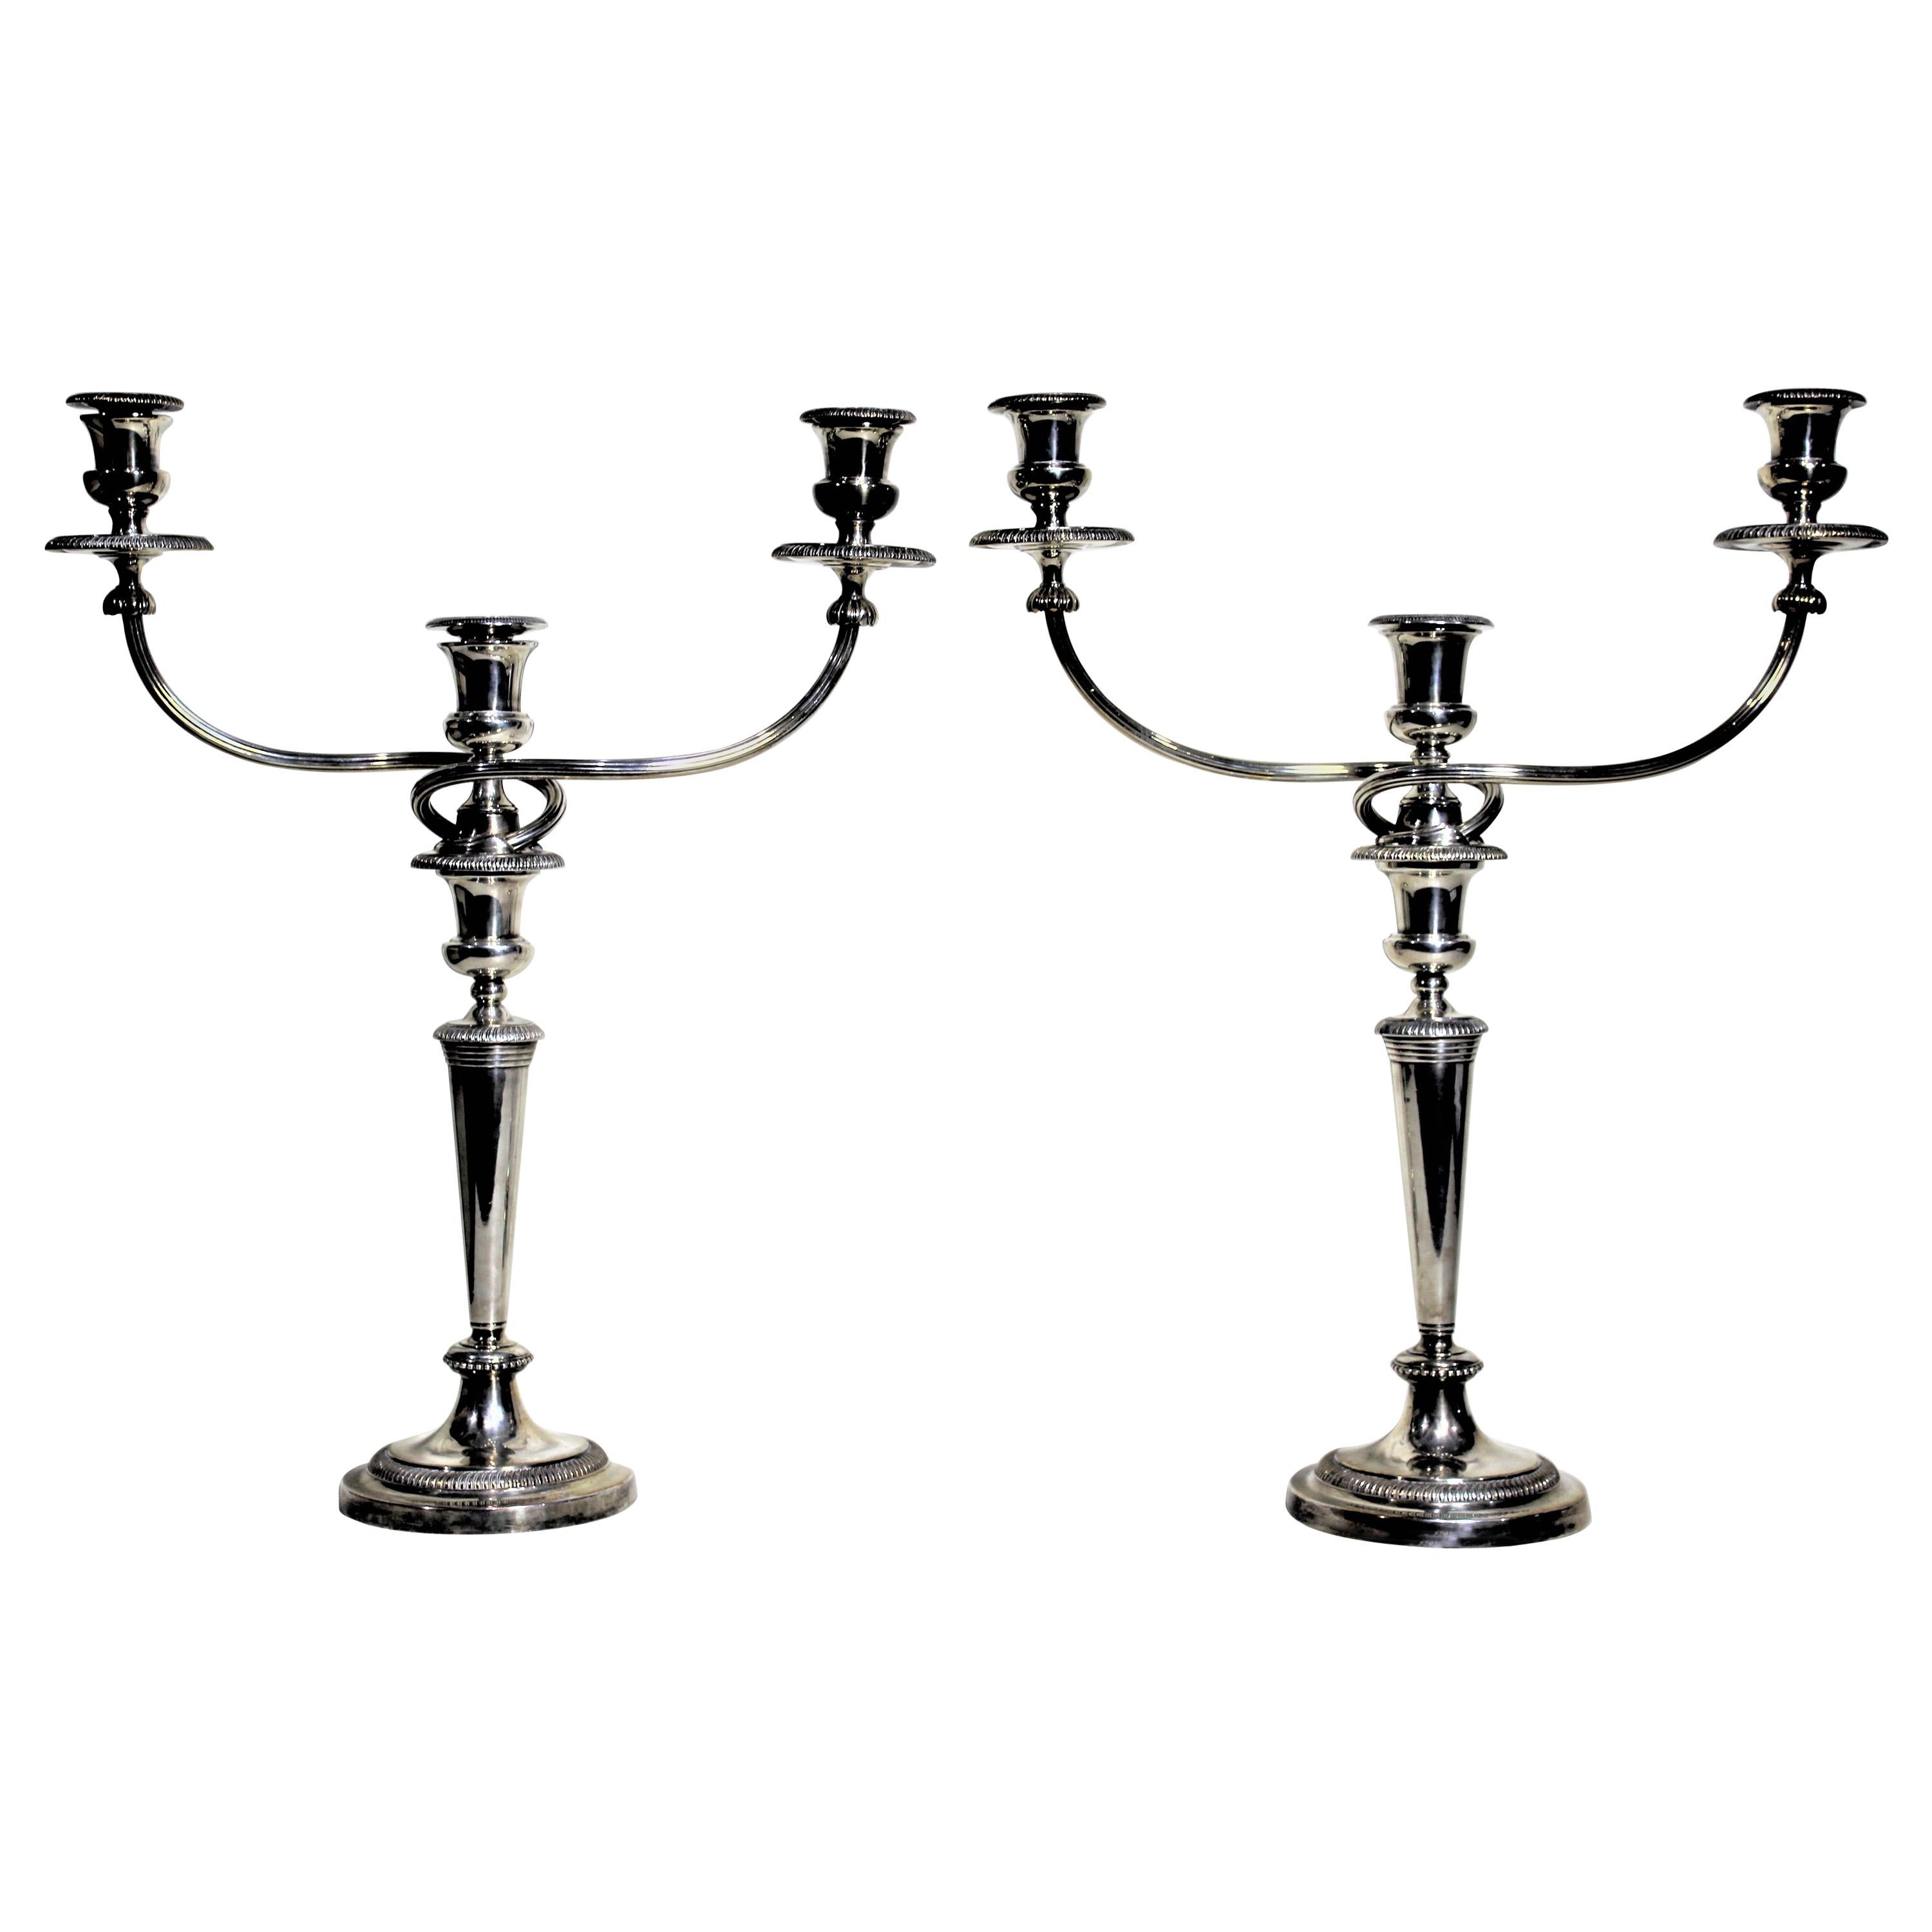 Mathew Bolton Antique Sheffield Silver Plated 3 Branch Convertible Candelabras For Sale